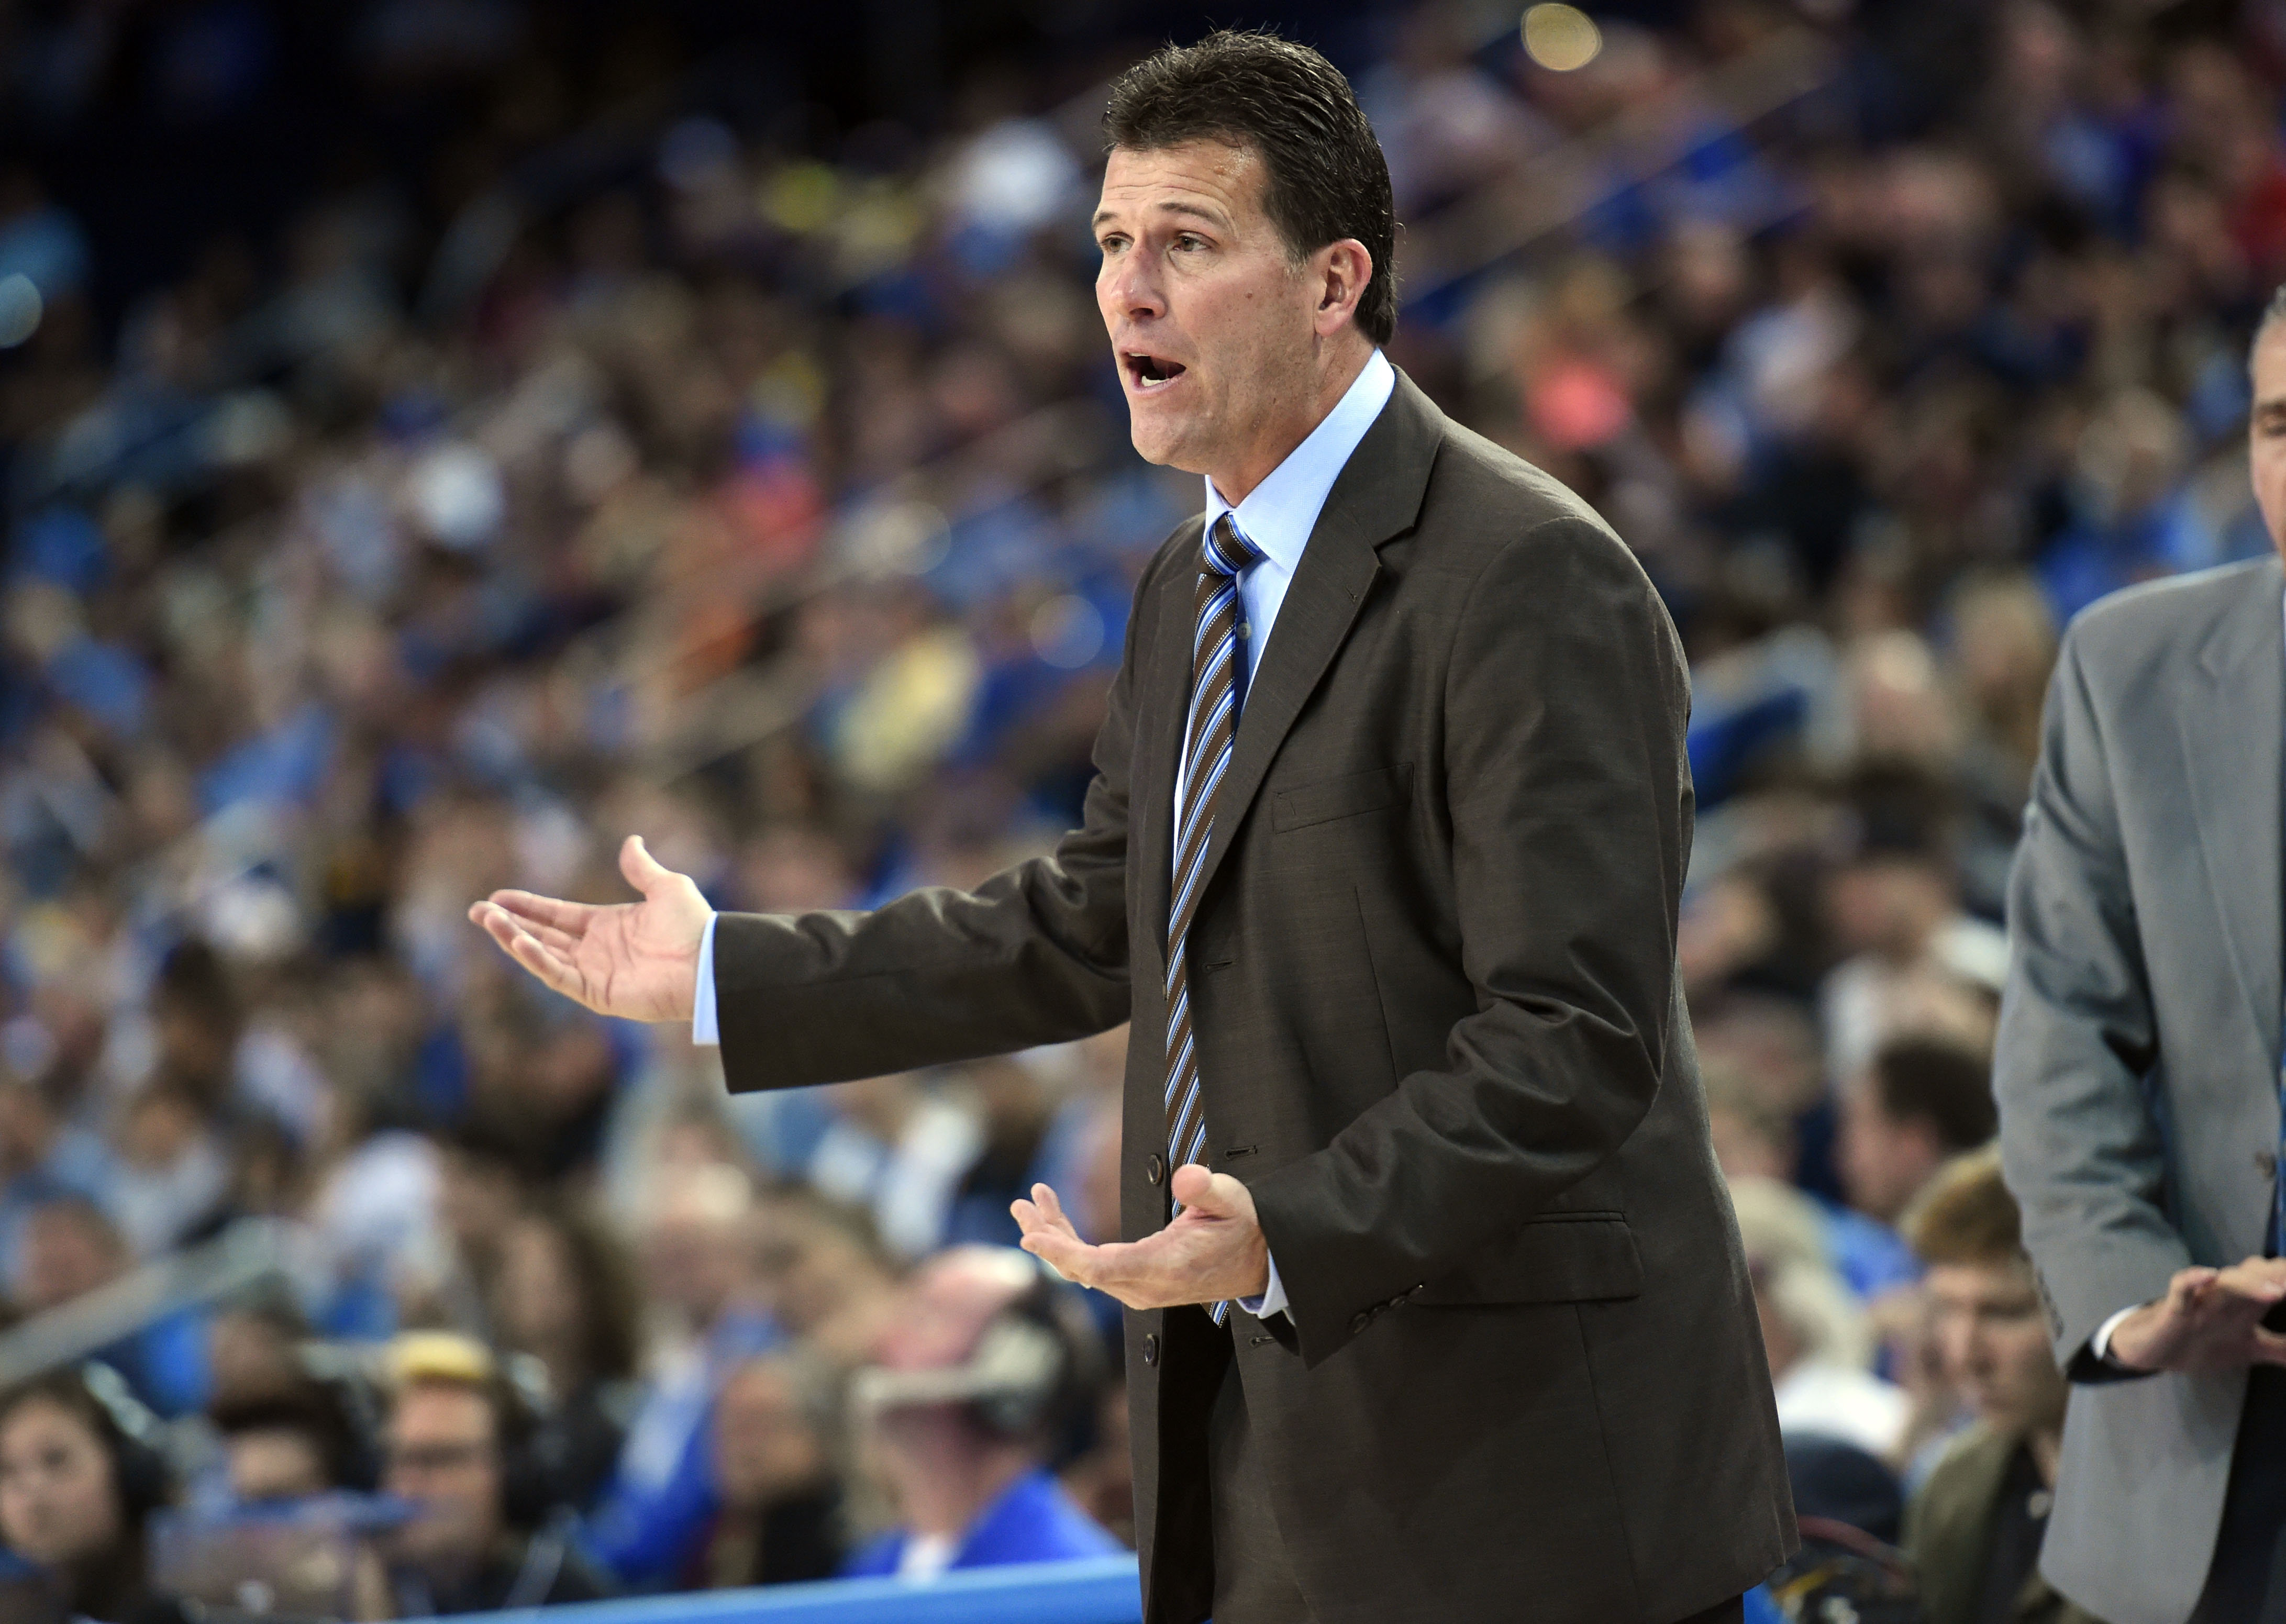 After guiding UCLA to one of its worst seasons in recent memory, what questions are facing Steve Alford and the Bruins? (Stephen Carr/Staff)